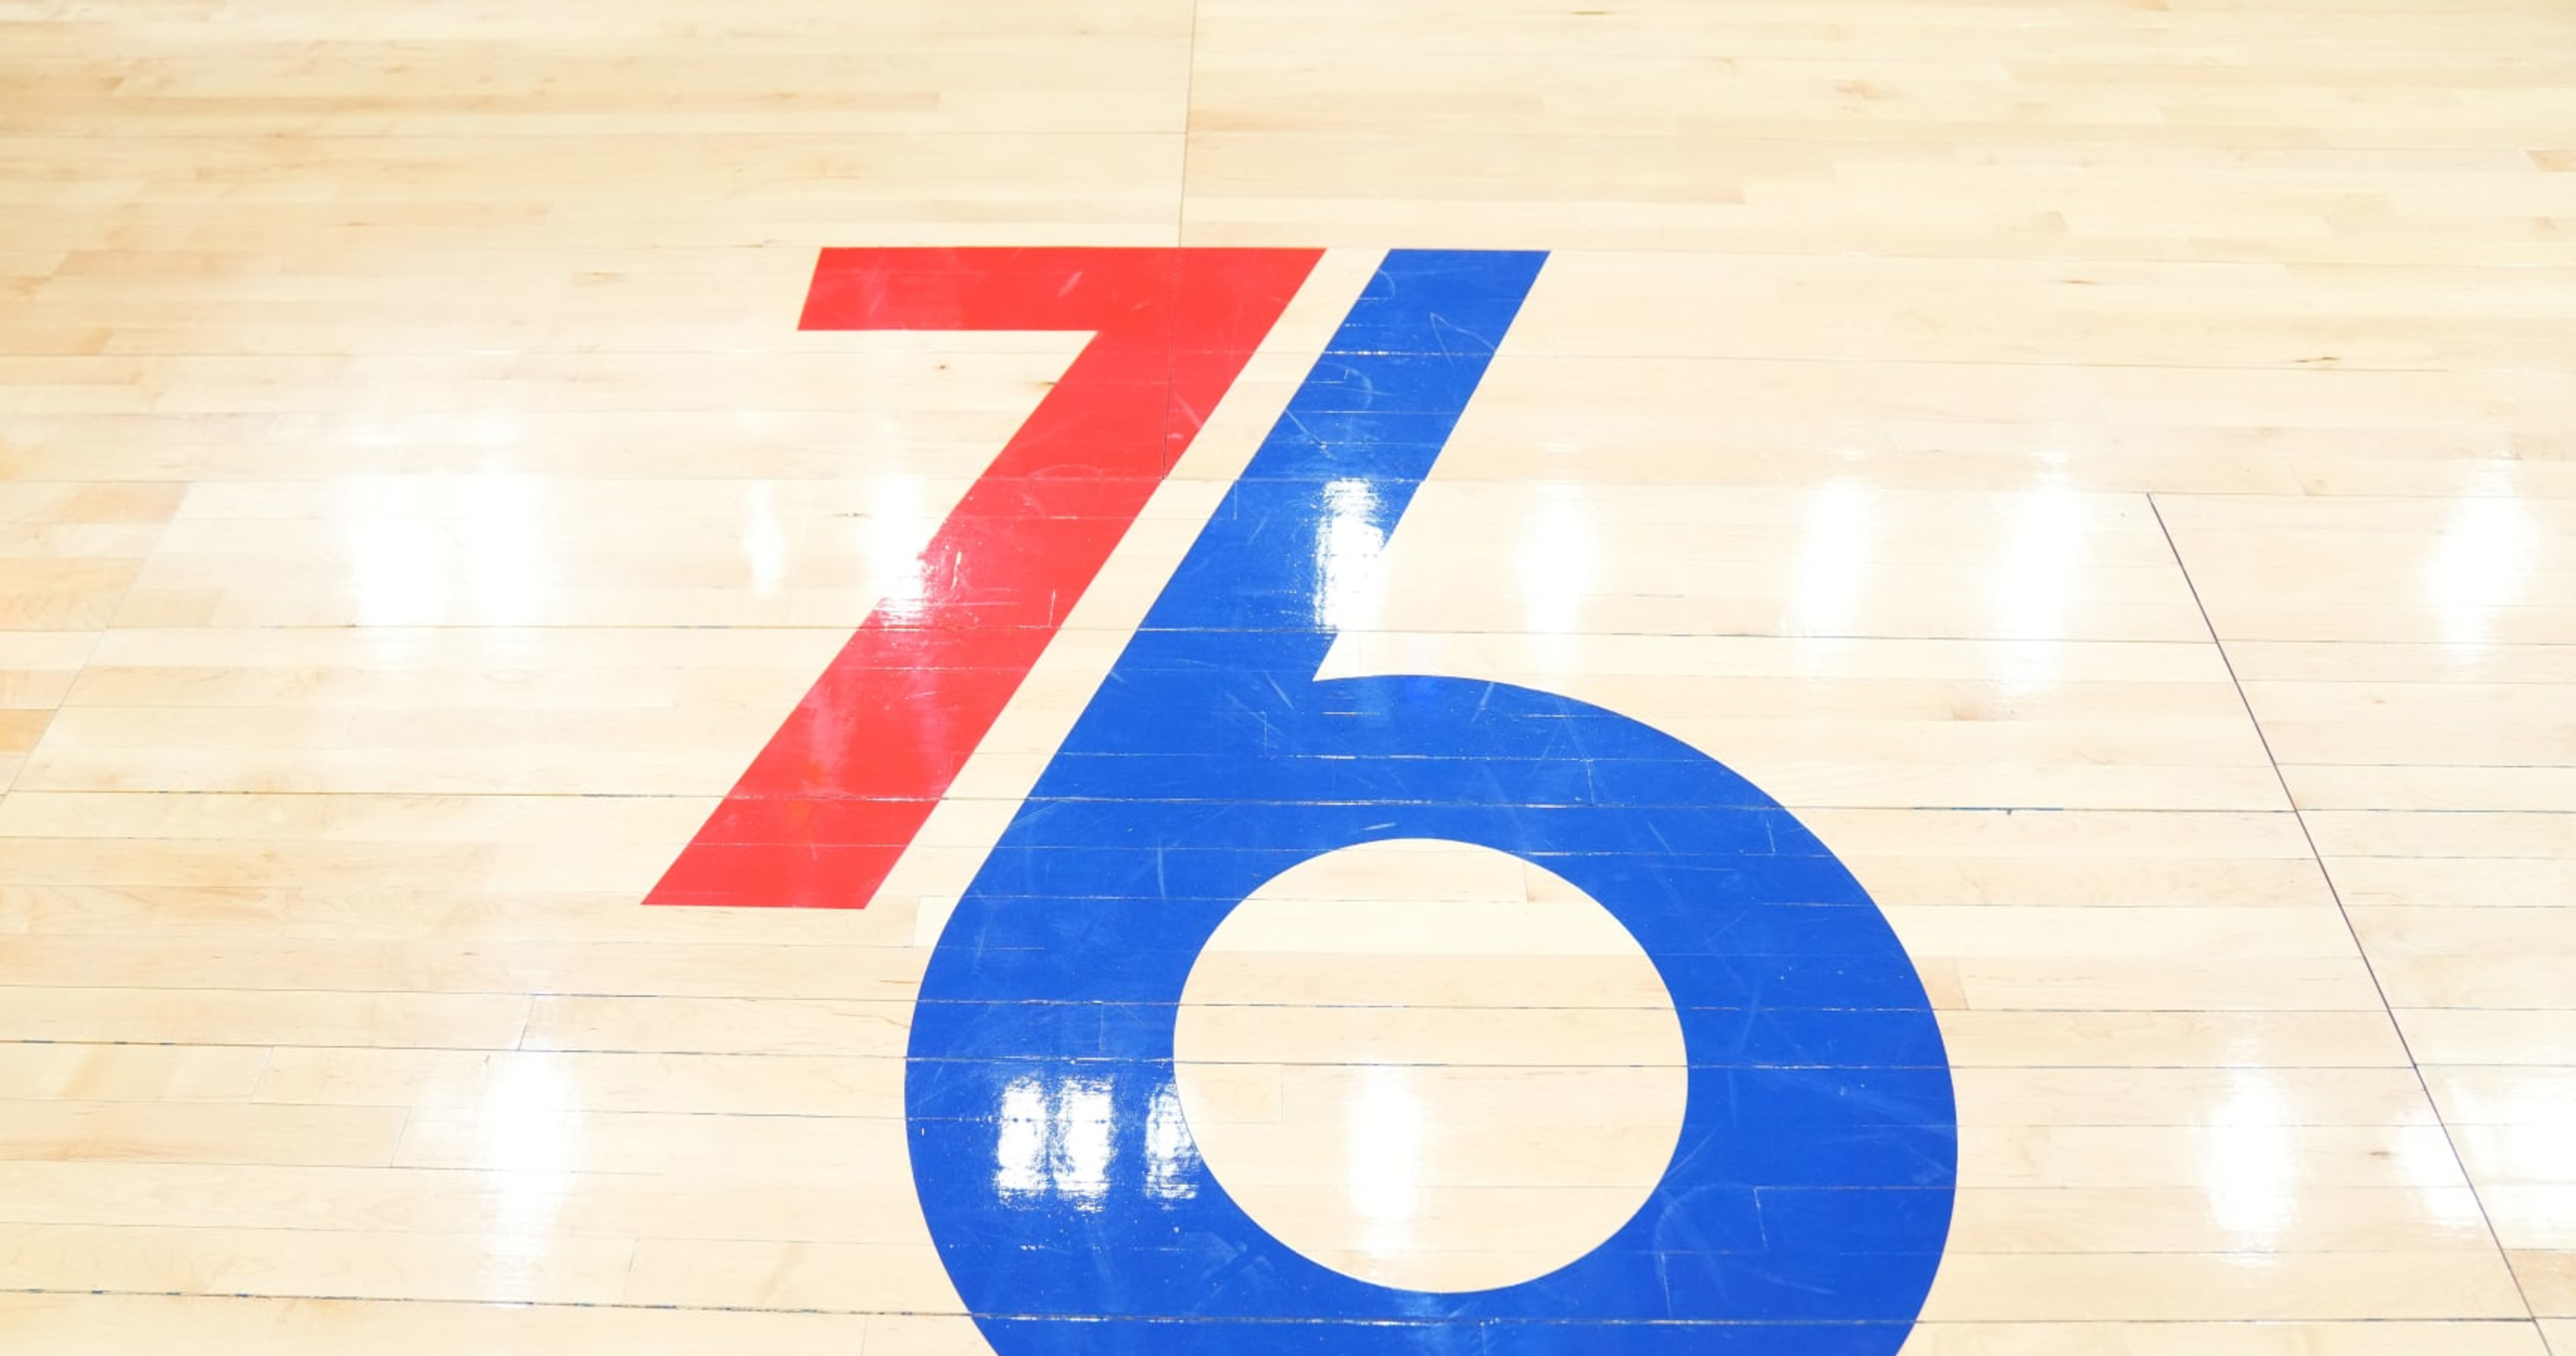 In '05 the 76ers had to pay a massive fine for long shorts